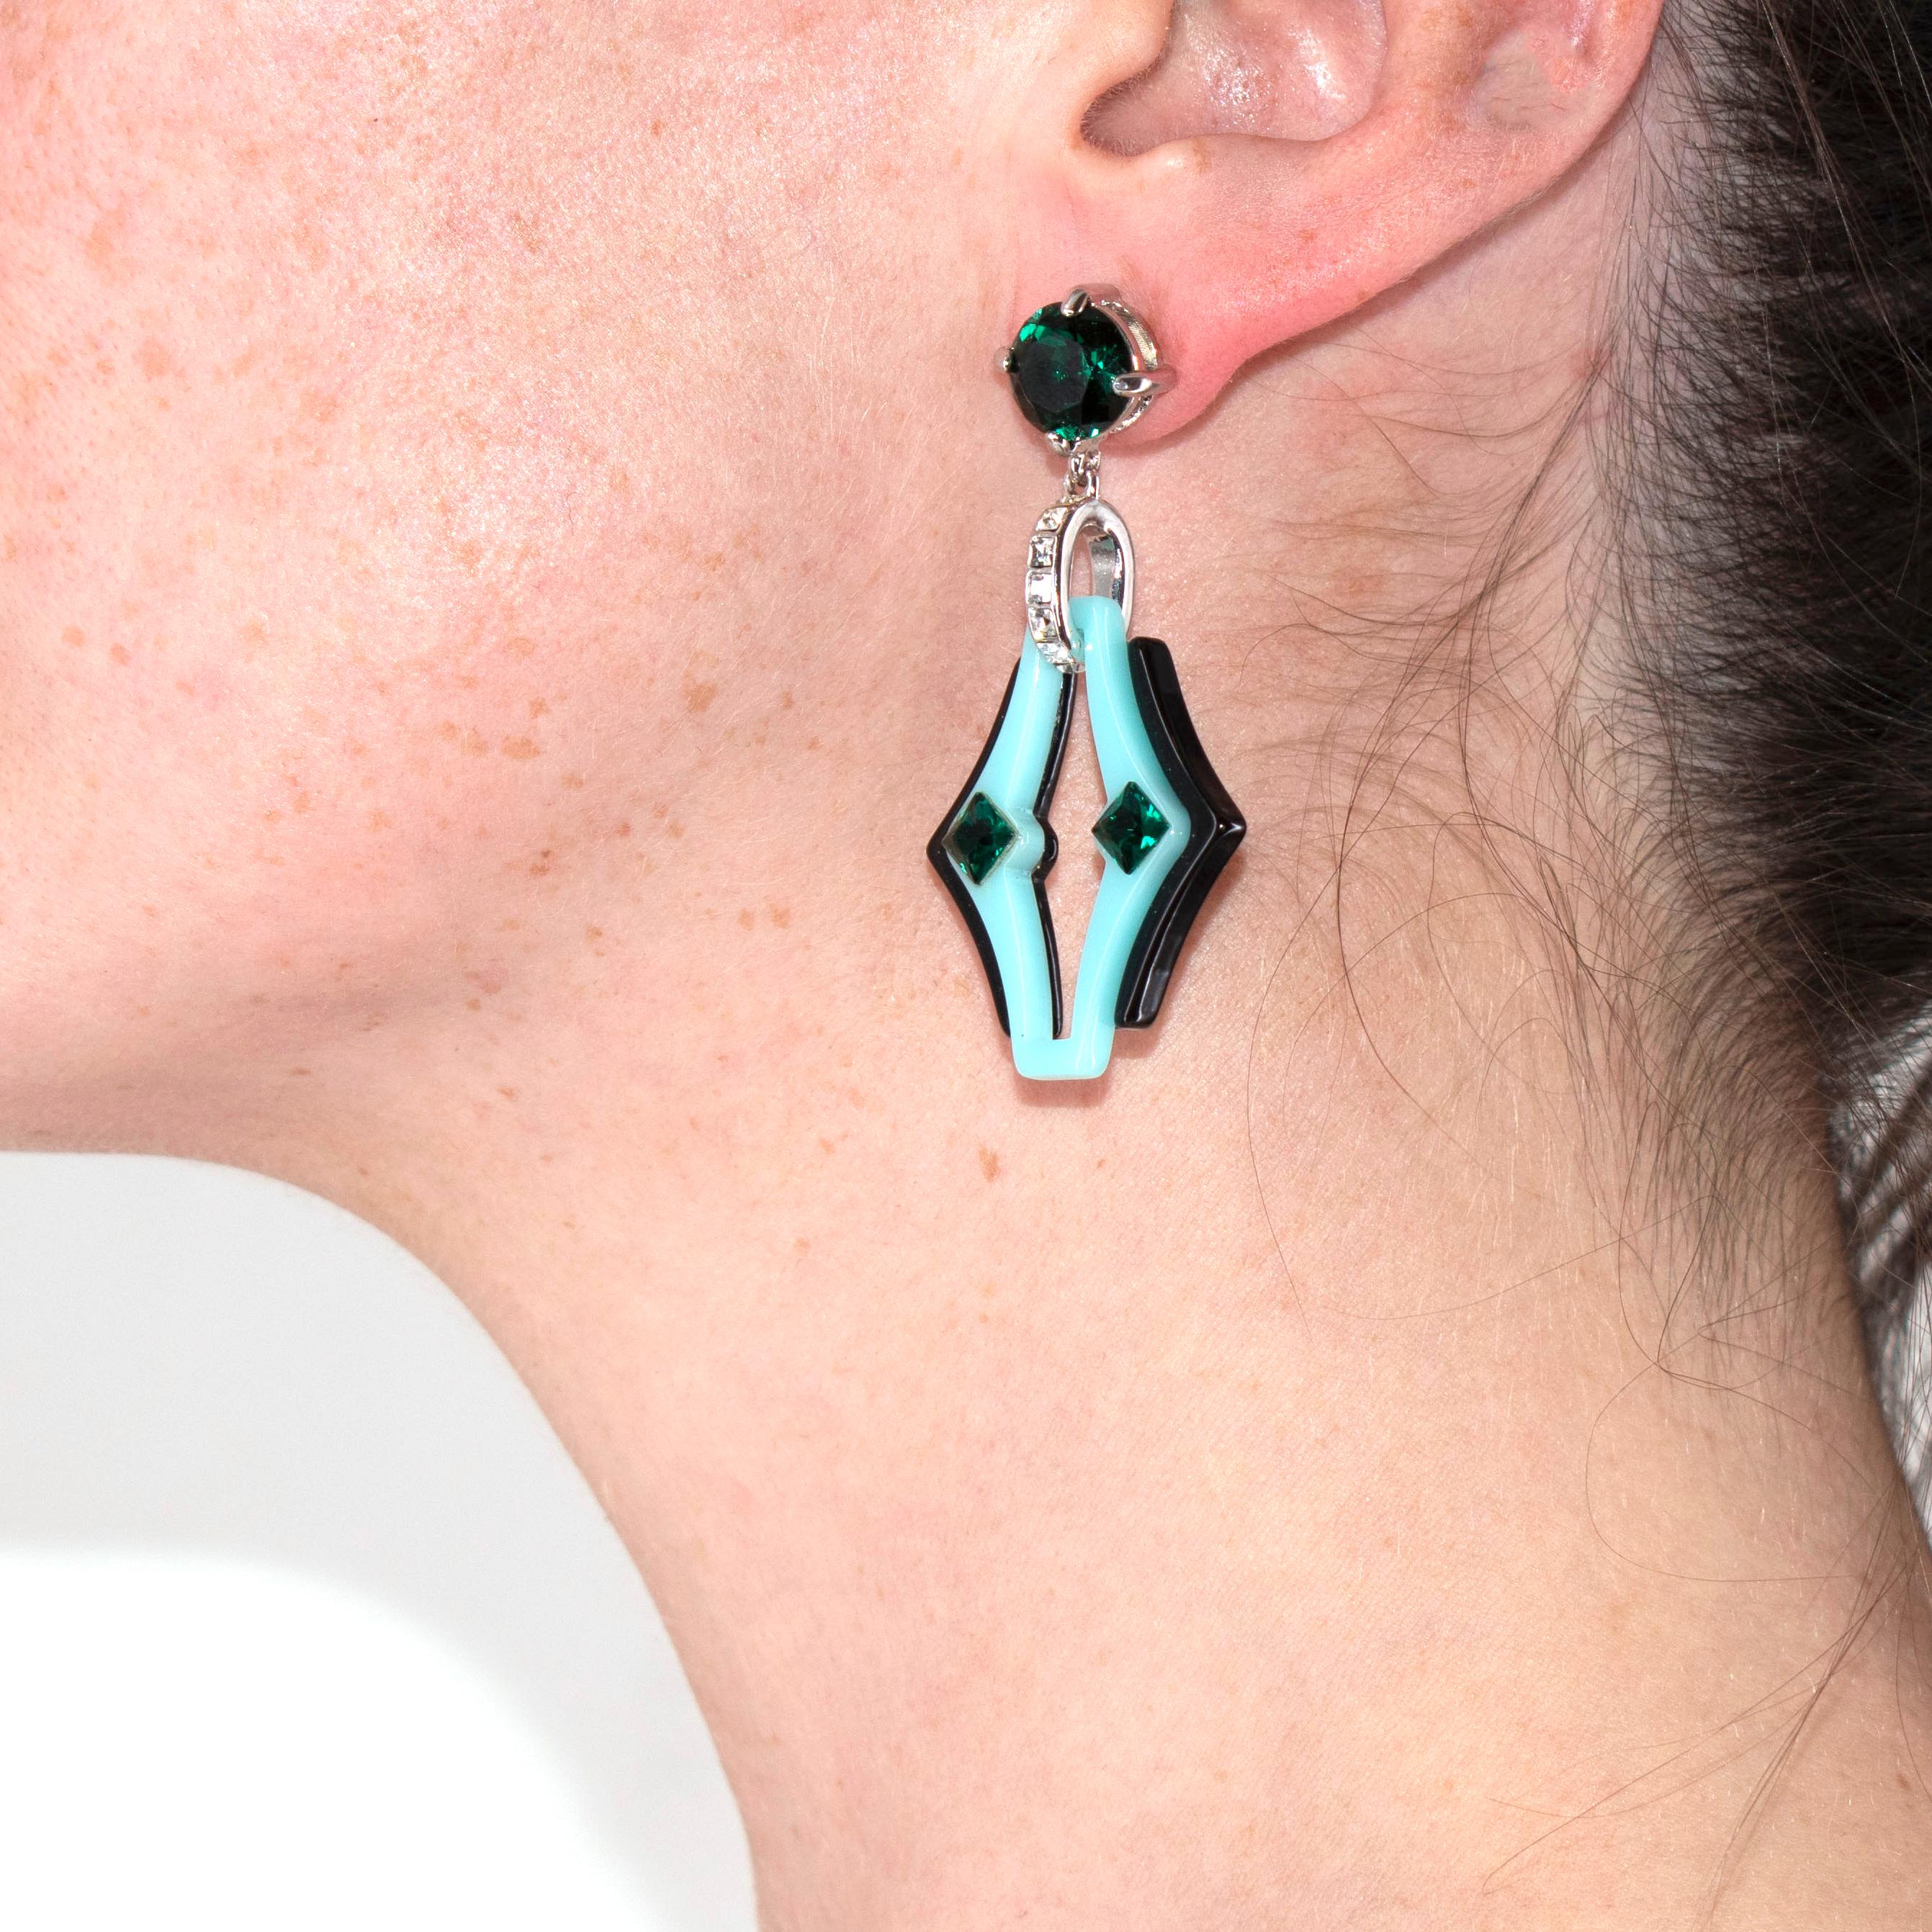 Prada Turquoise Sculpted Acetate & Crystal Drop Earrings

- Shaped as diamonds with abstract cutouts, crafted in a black and turquoise acetate, finished with a green crystal stud
- Post fastening, for pierced ears 

Measurements:
5cm length 
3cm